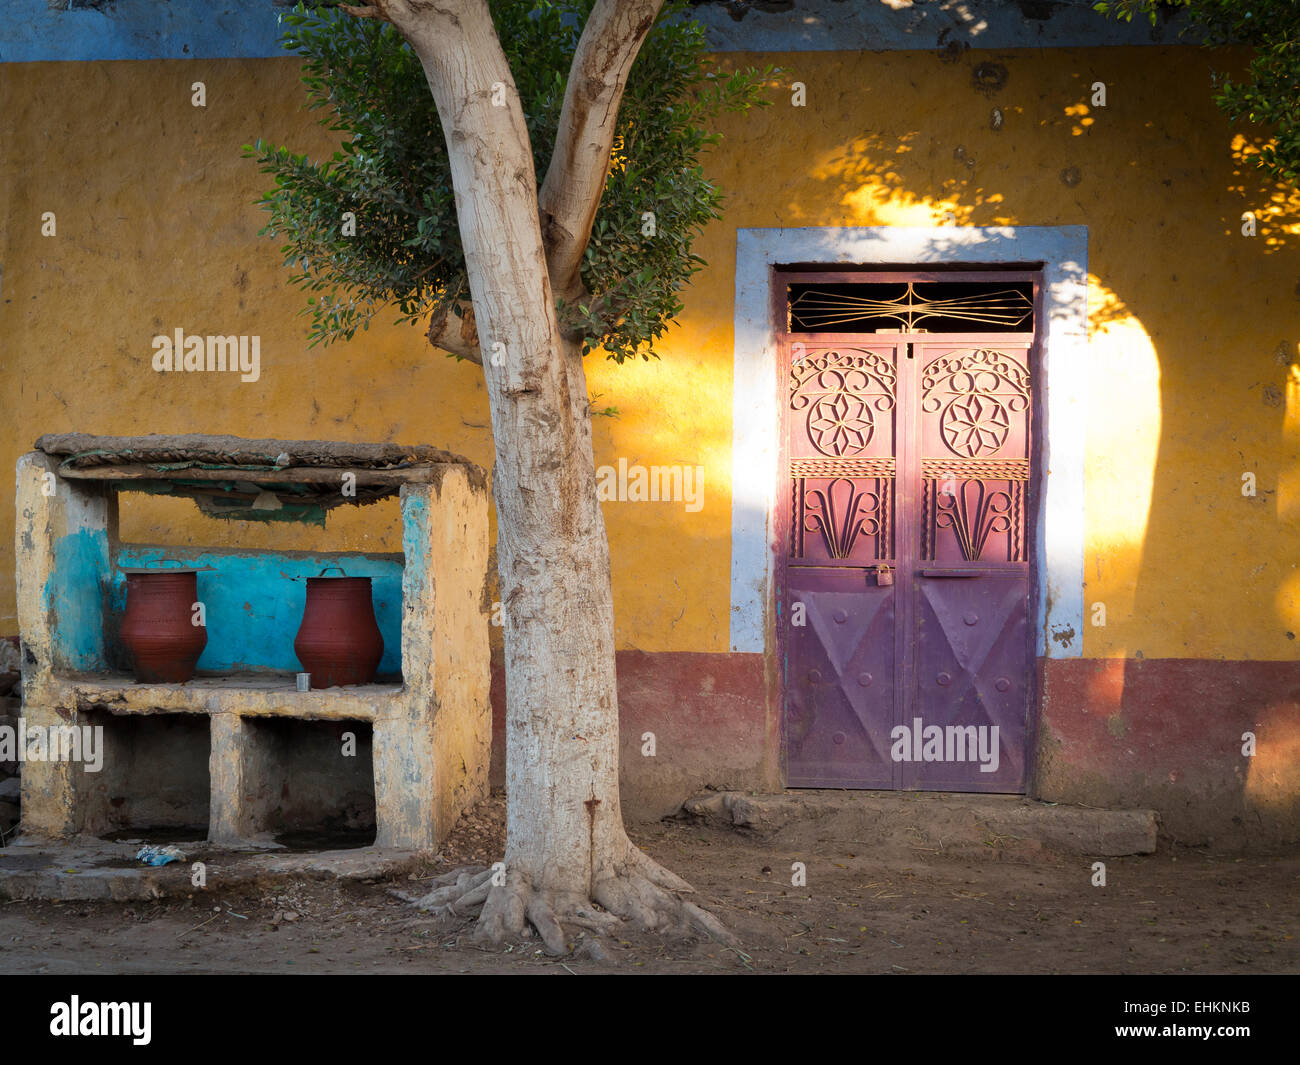 2 pottery public drinking water carriers on the roadside under a shady tree in front of yellow house and metal door Egypt Africa Stock Photo